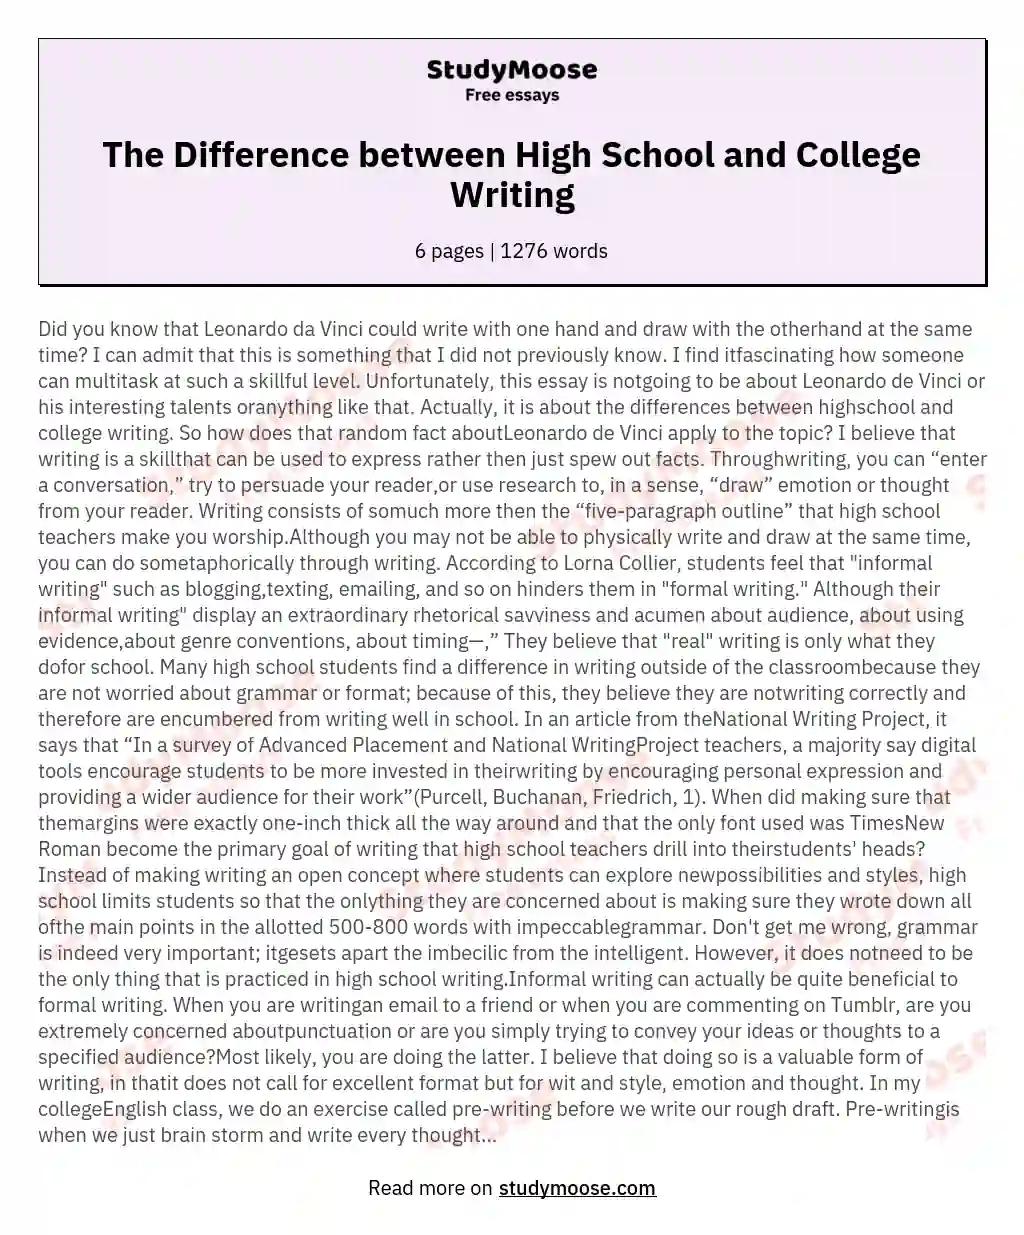 what is the difference between highschool and college